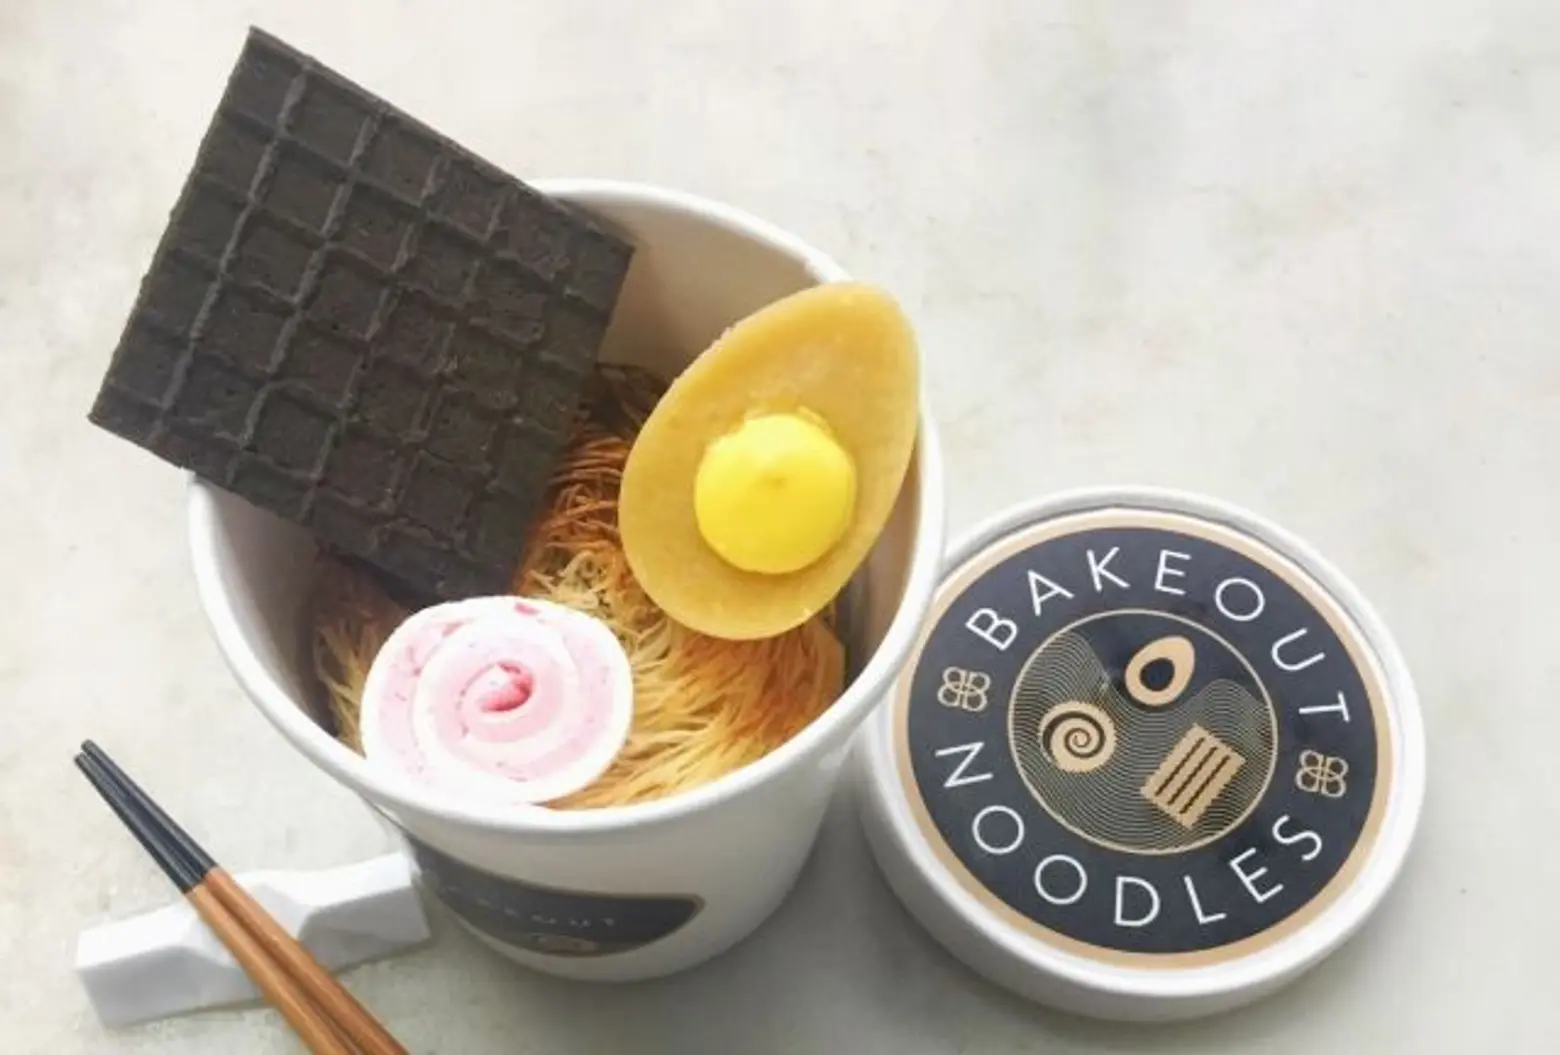 Tomorrow get free ‘Bakeout Noodles’, the Cronut creator’s latest invention